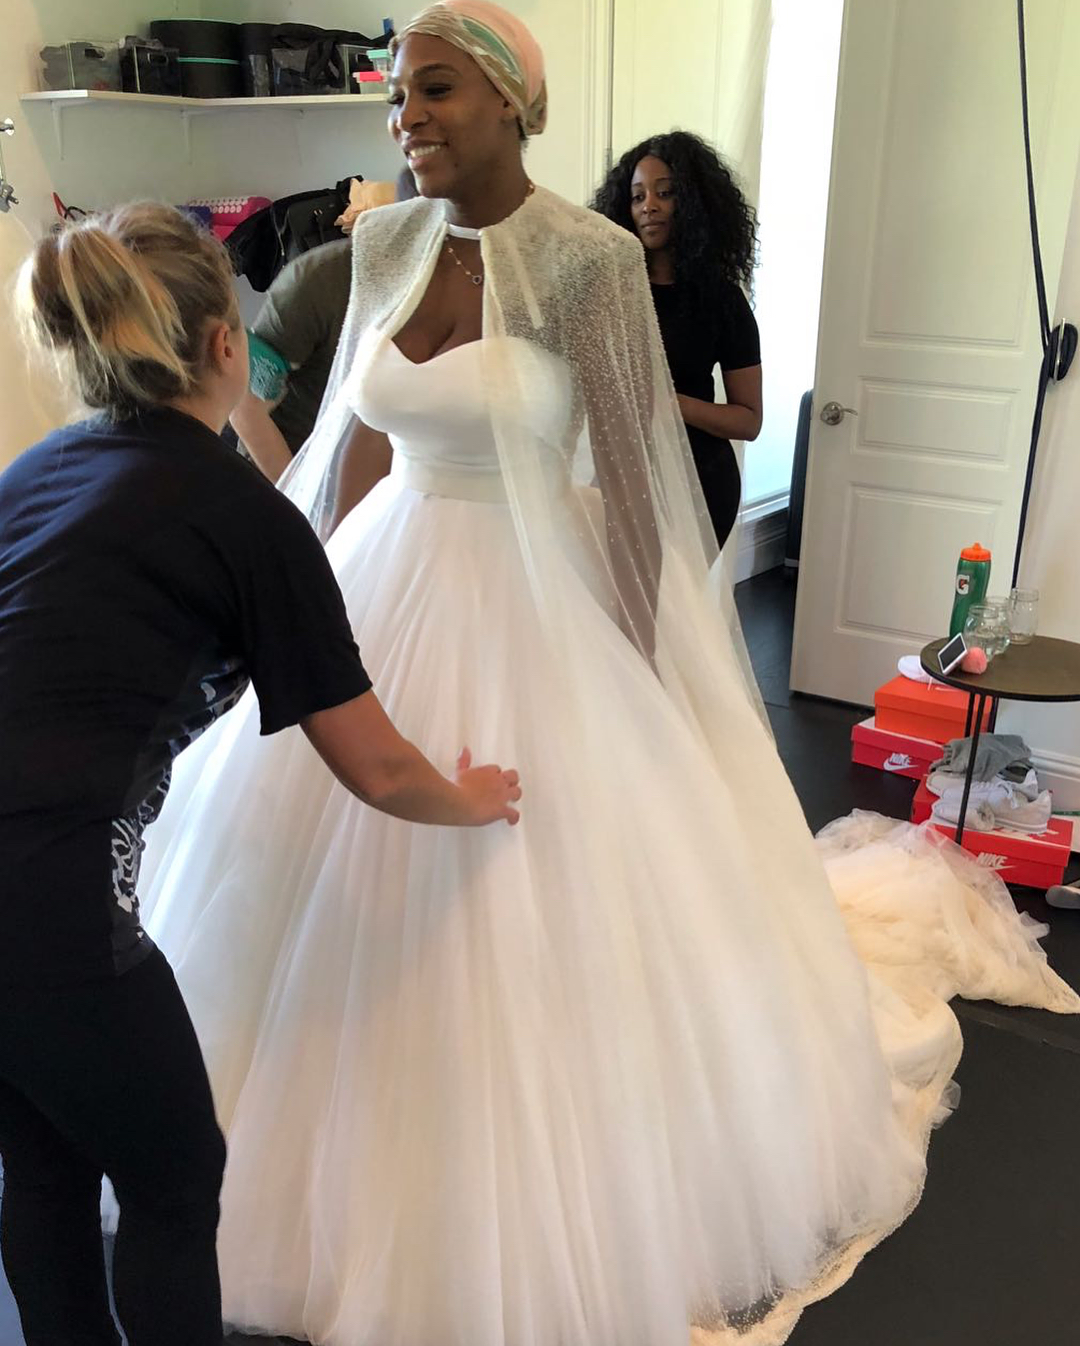 Williams during a gown fitting